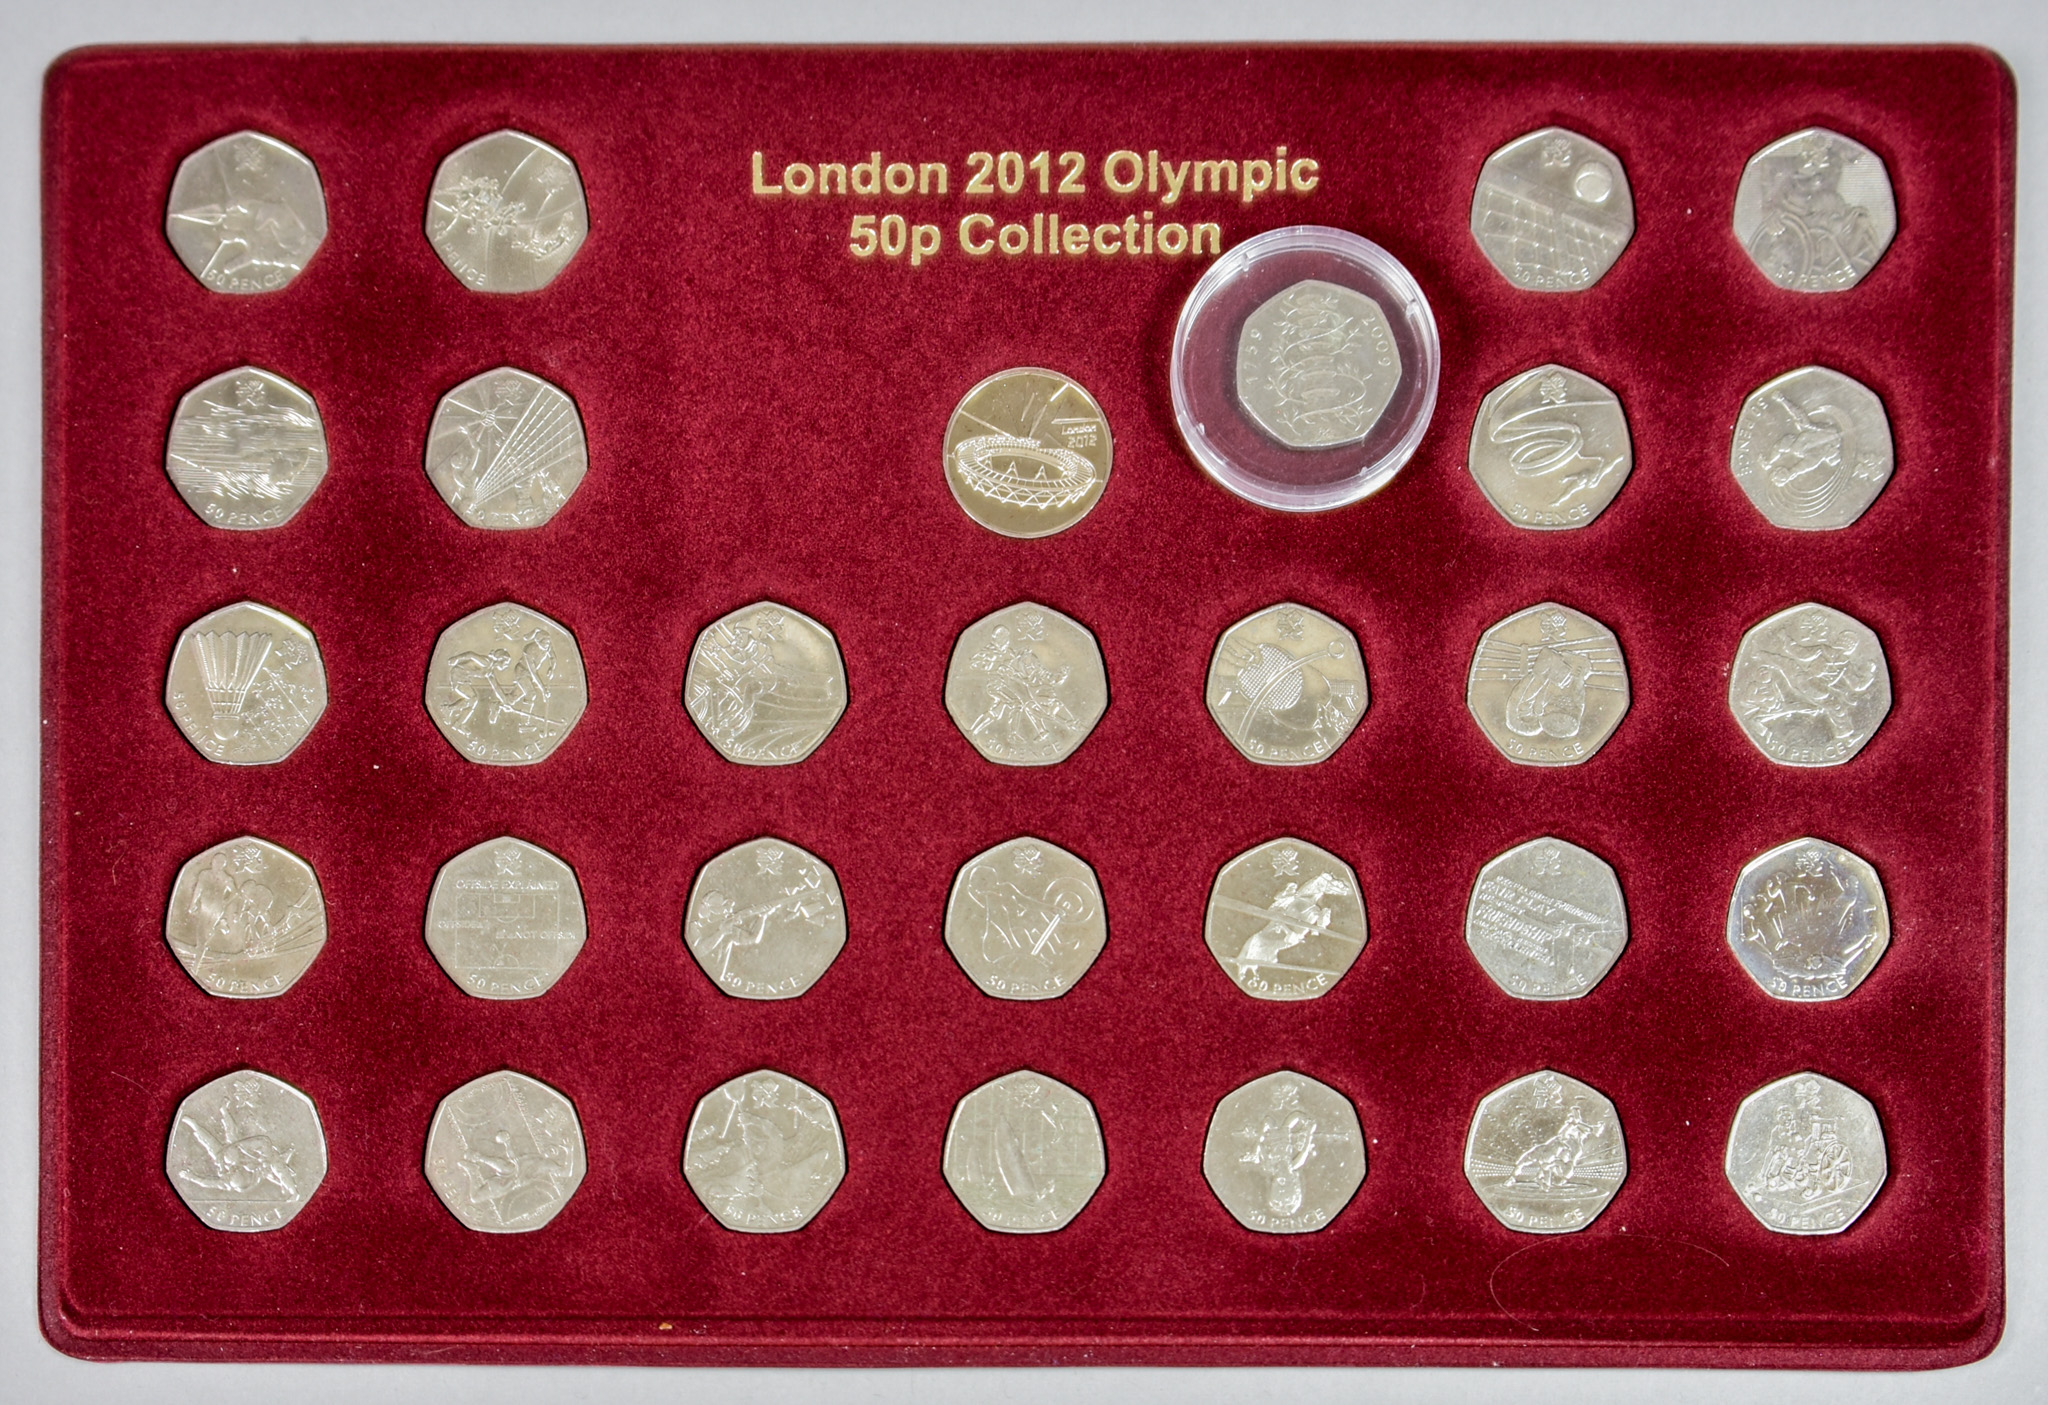 A 2009 Kew Gardens Fifty Pence Piece, a London 2012 Olympic fifty pence piece collection in fitted